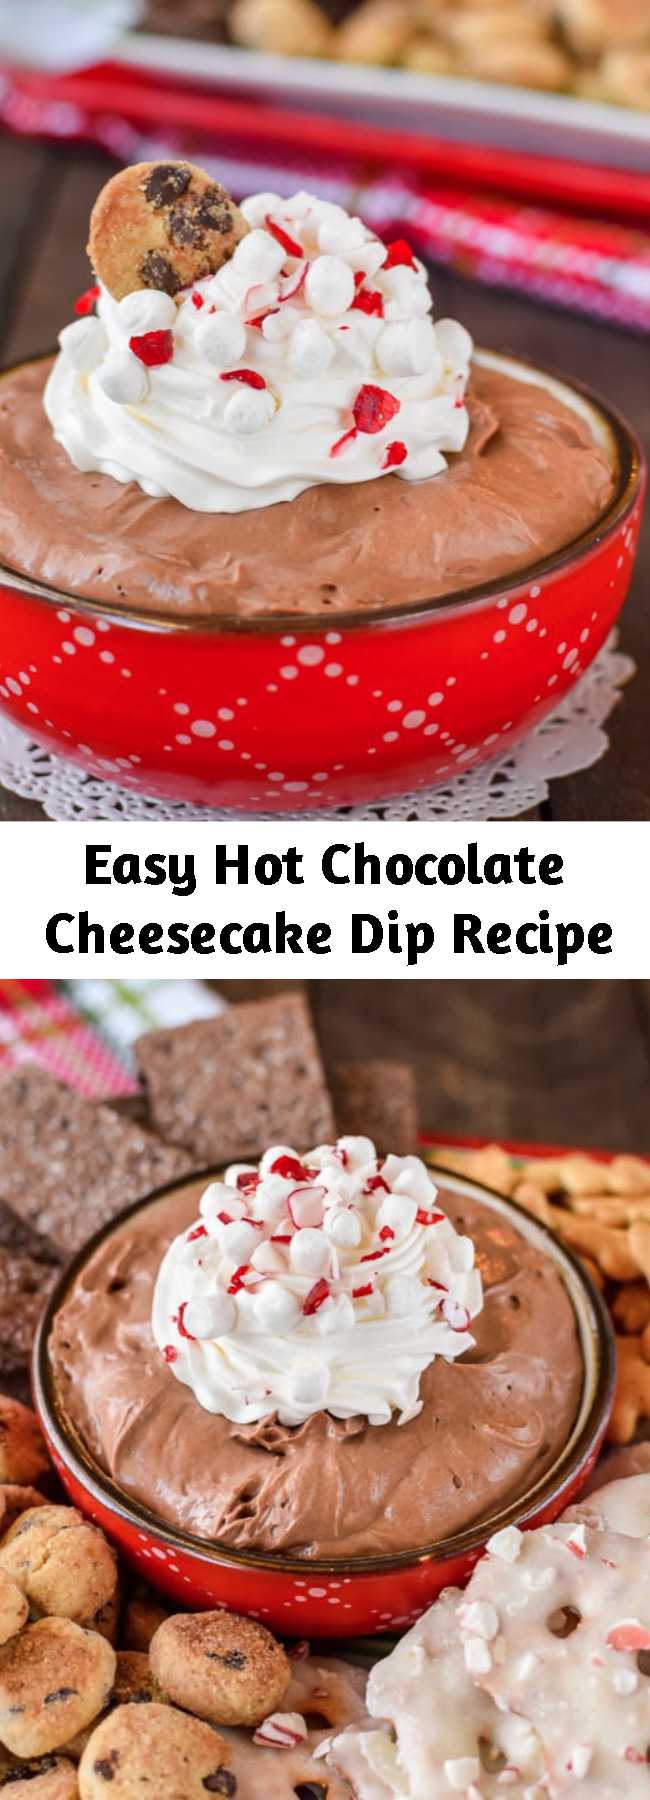 Easy Hot Chocolate Cheesecake Dip Recipe - This easy Hot Chocolate Cheesecake Dip is the perfect no bake treat to share at holiday parties.  It is full of hot chocolate flavor, is easy to make, and is delicious with cookies and fruit.